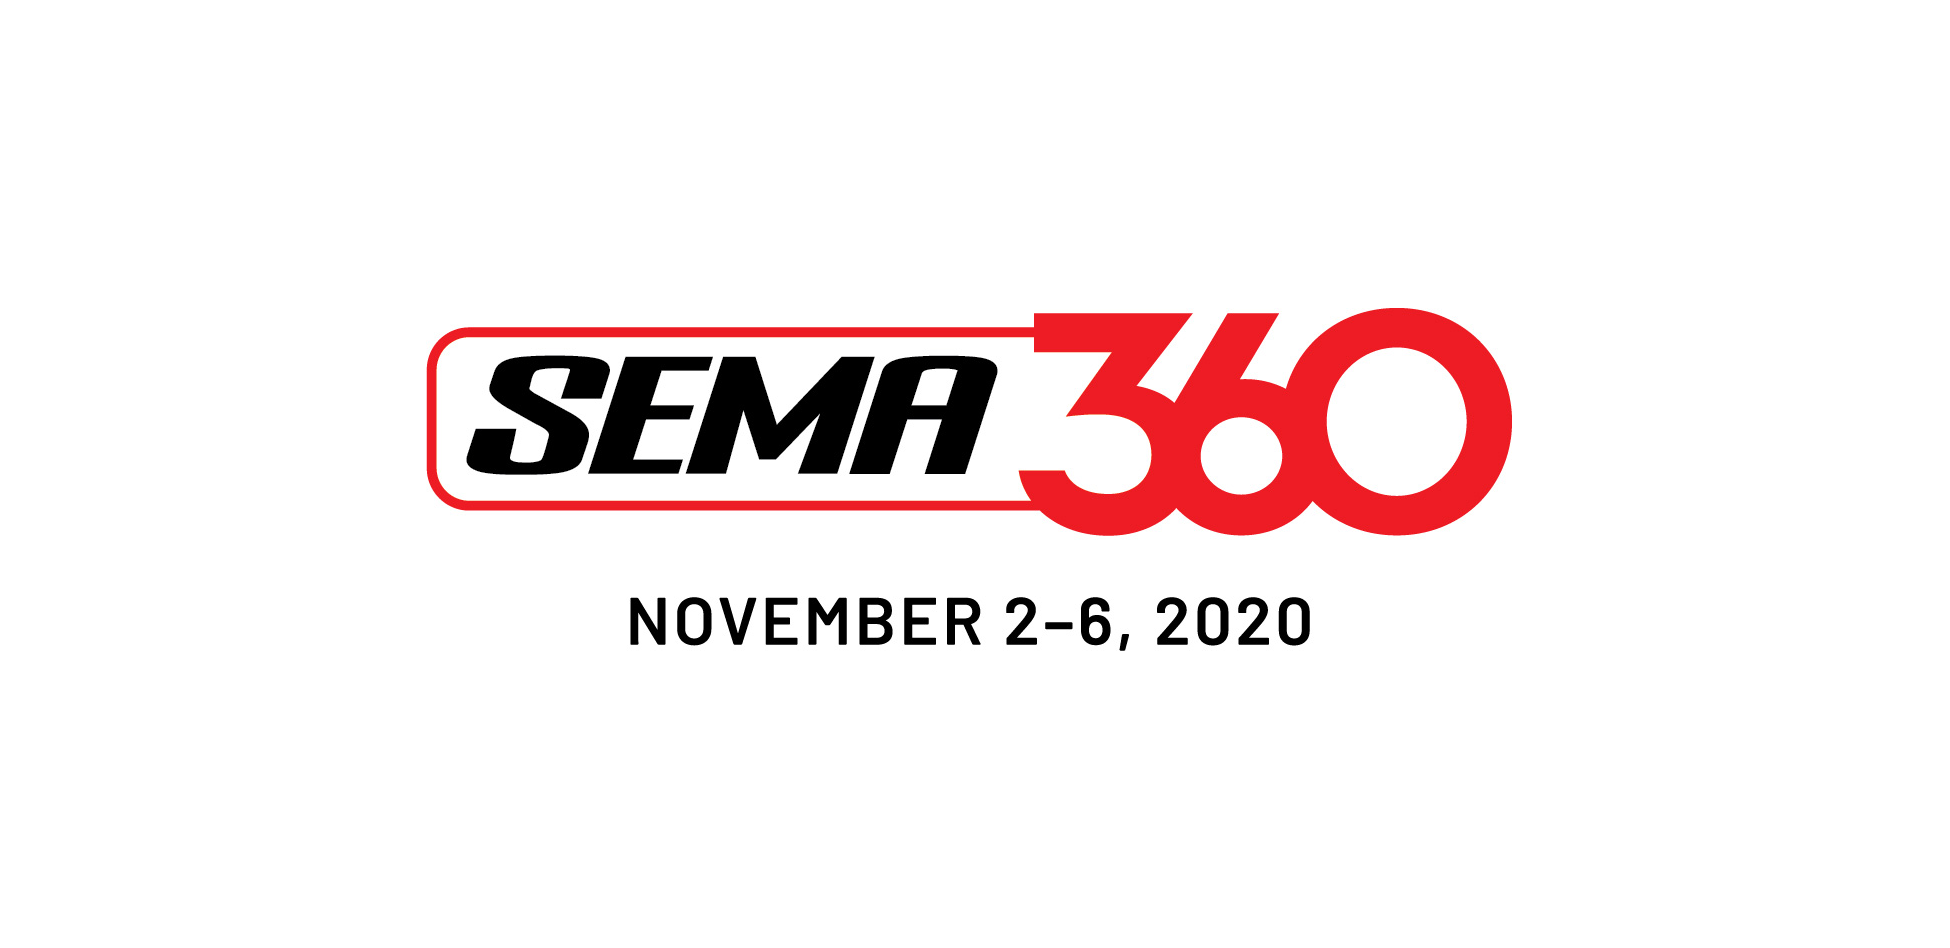 SEMA360 Online Marketplace To Replace 2020 SEMA Show